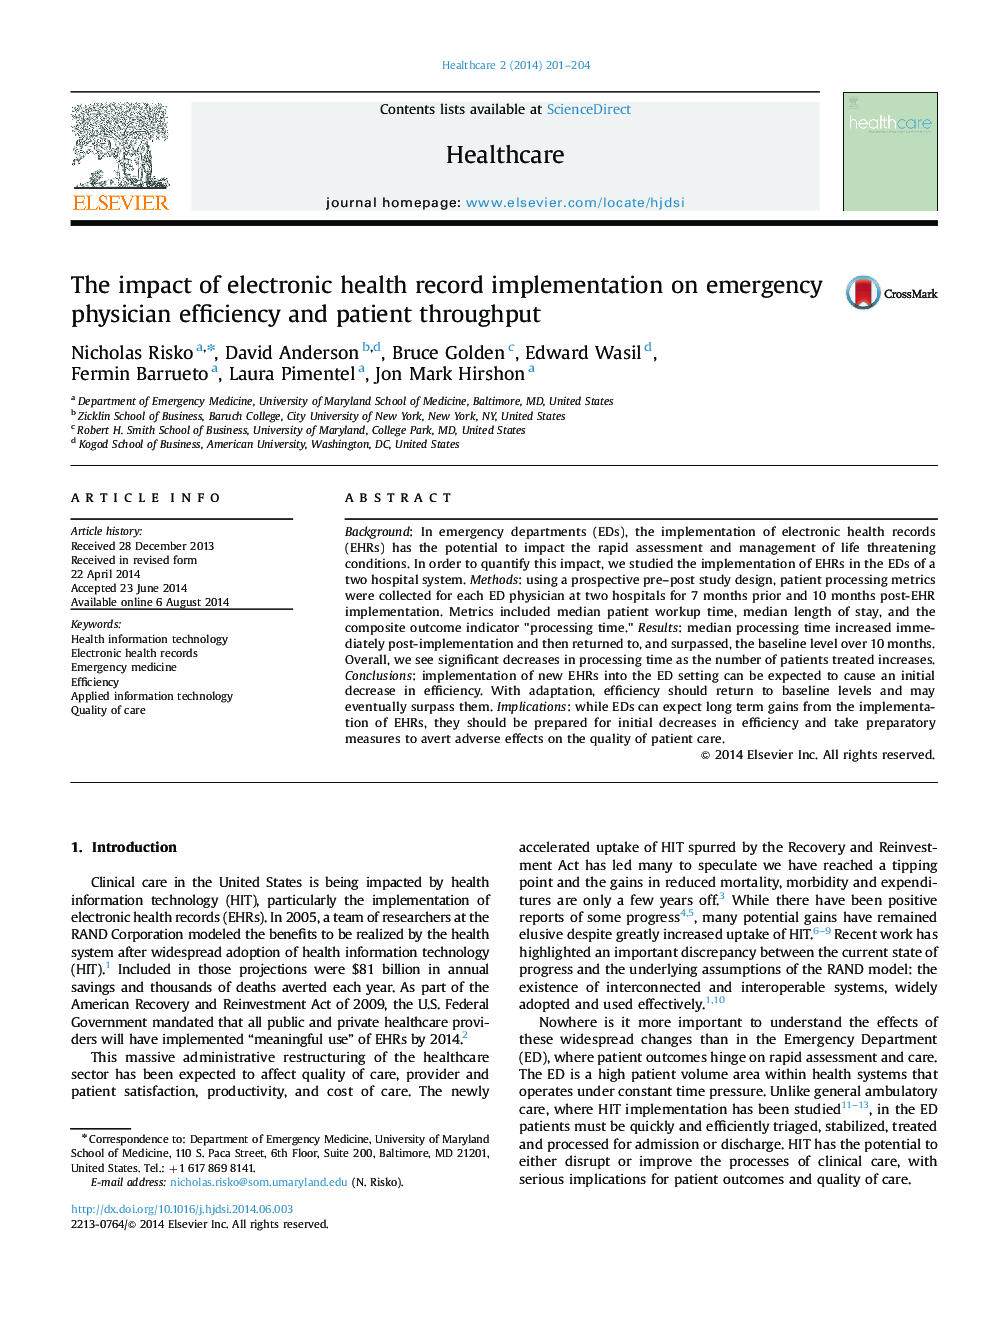 The impact of electronic health record implementation on emergency physician efficiency and patient throughput